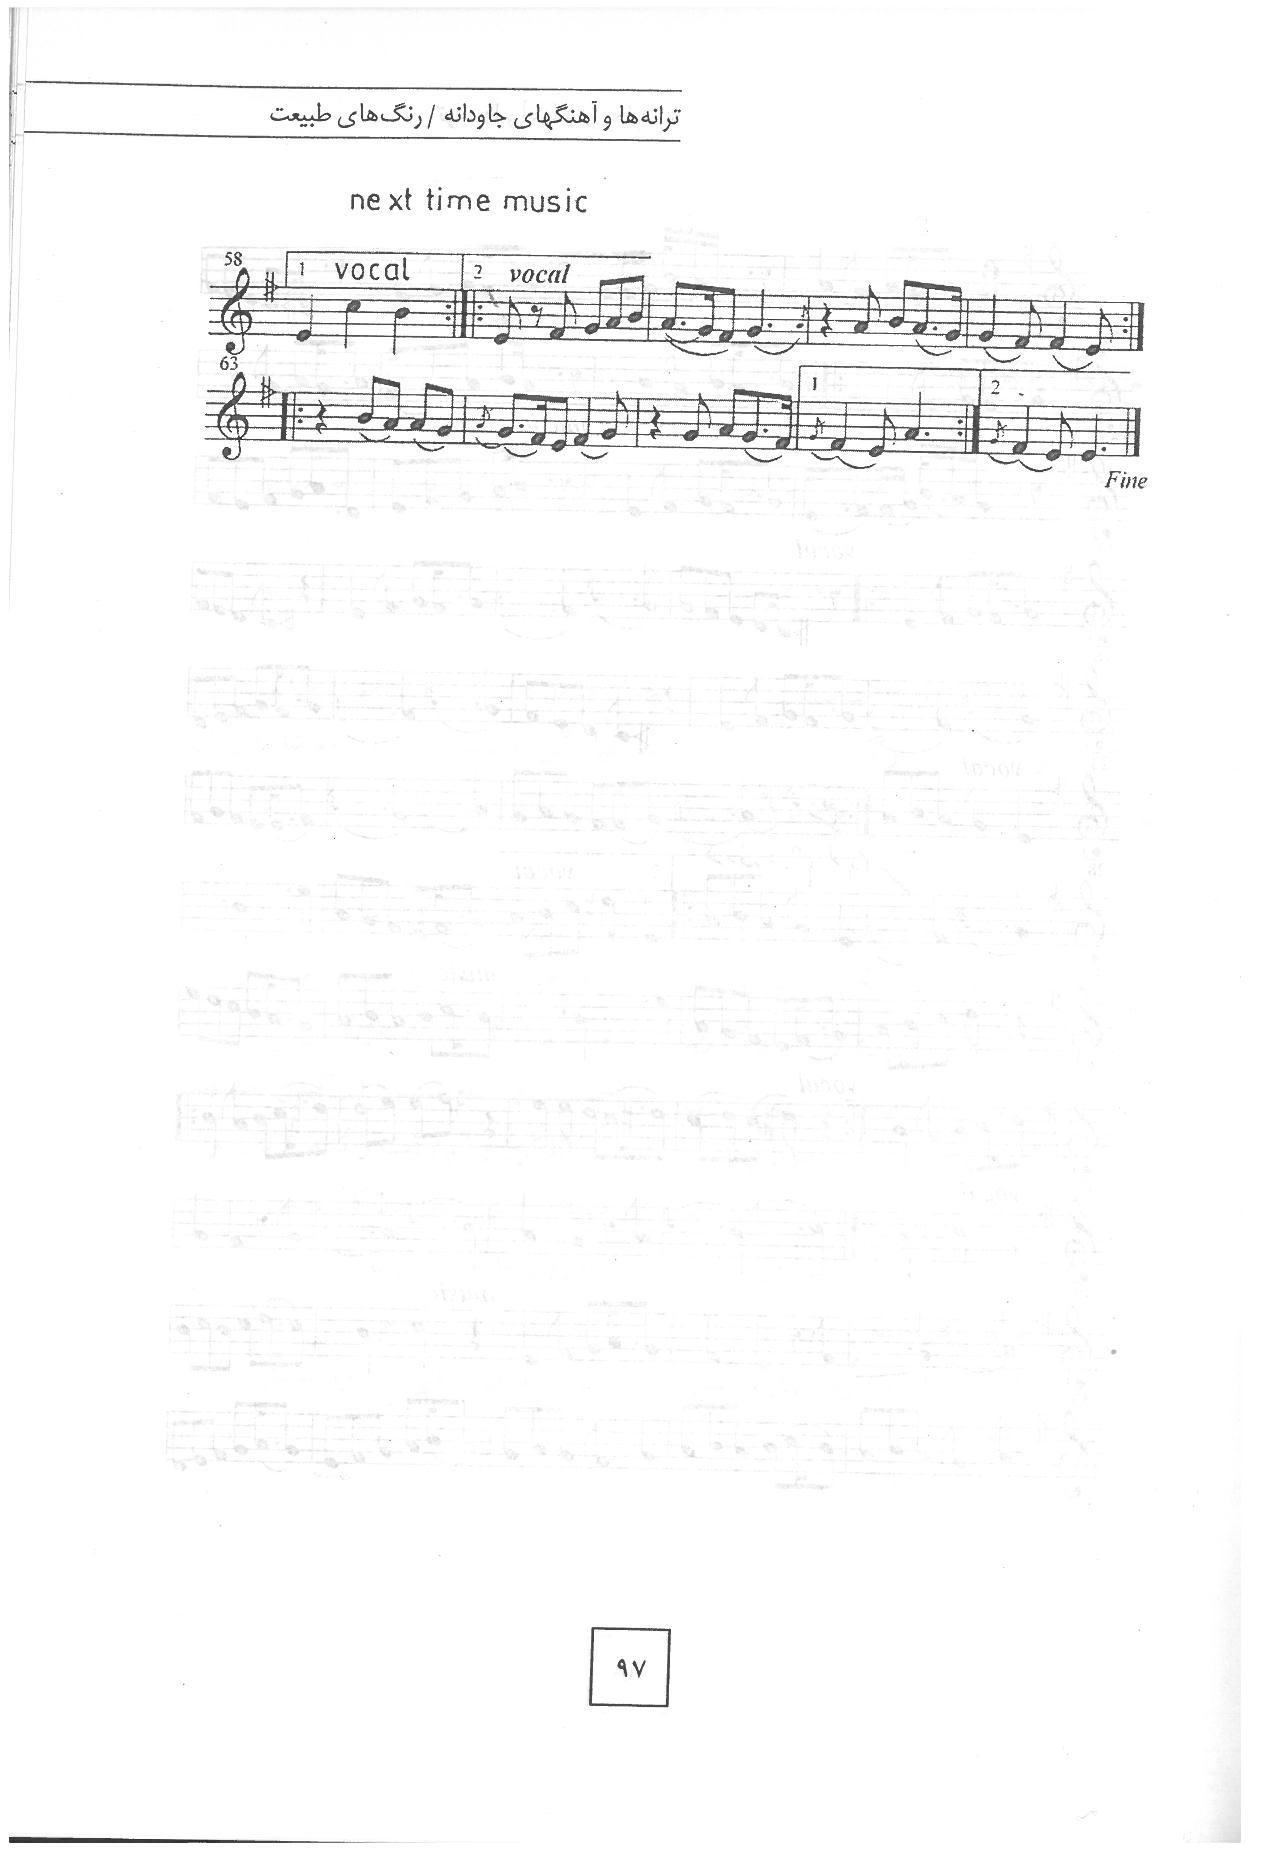 A sheet music page with two lines of text.